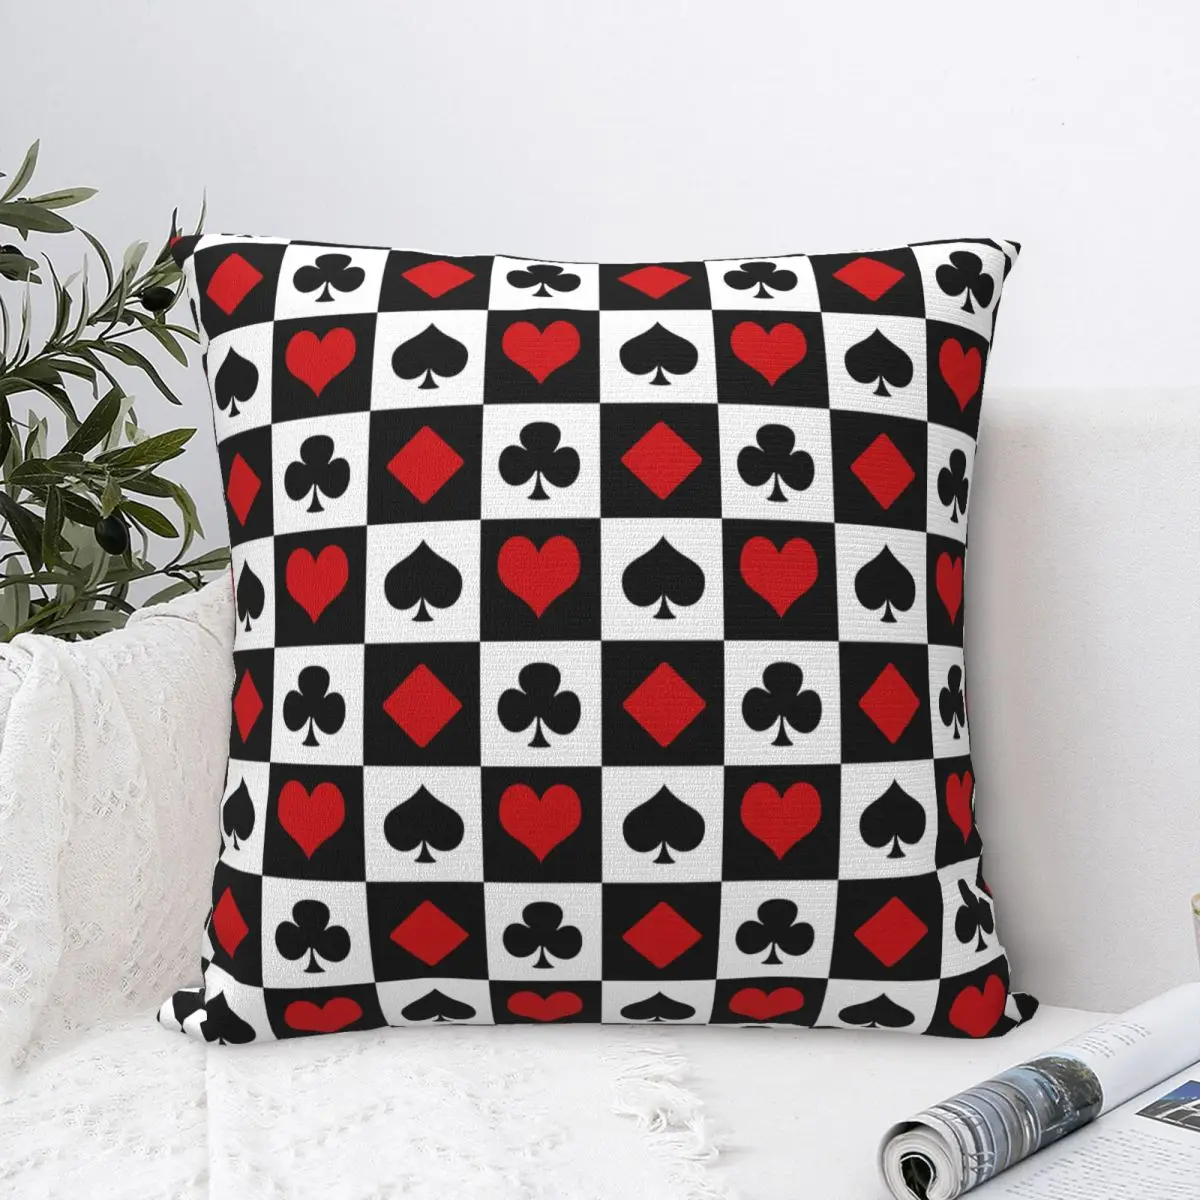 

Playing Card Pillowcase Polyester Pillows Cover Cushion Comfort Throw Pillow Sofa Decorative Cushions Used for Home Bedroom